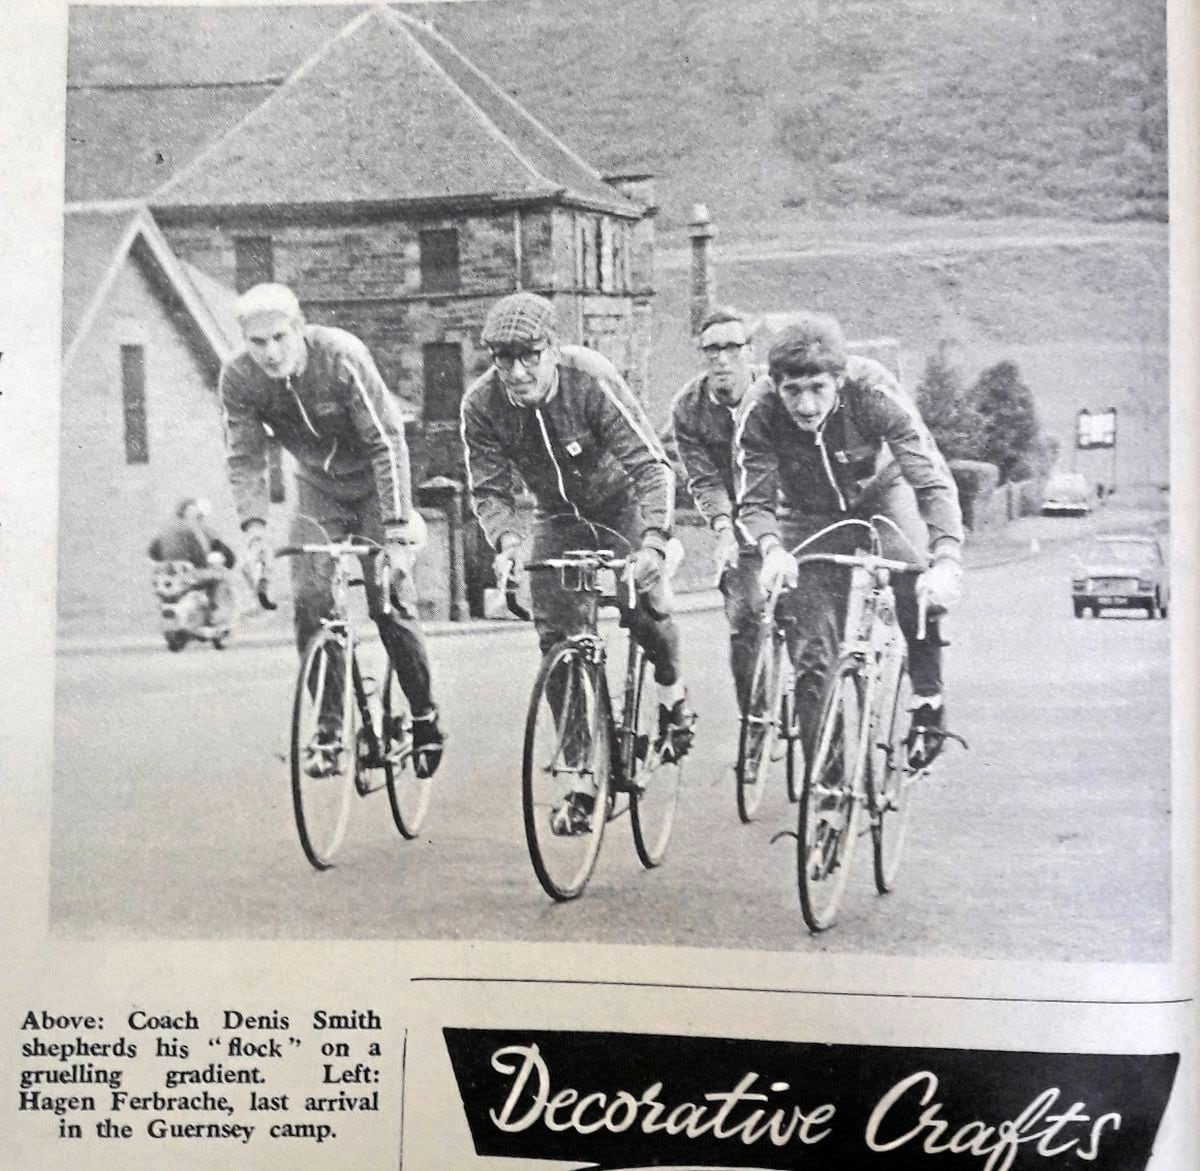 Cycling coach Denis Smith shepherds his 'flock' at the Edinburgh 1970 Commonwealth Games. Left to right: Steve Guilbert, Allan Renyard and Hagen Ferbrache. (30365522)